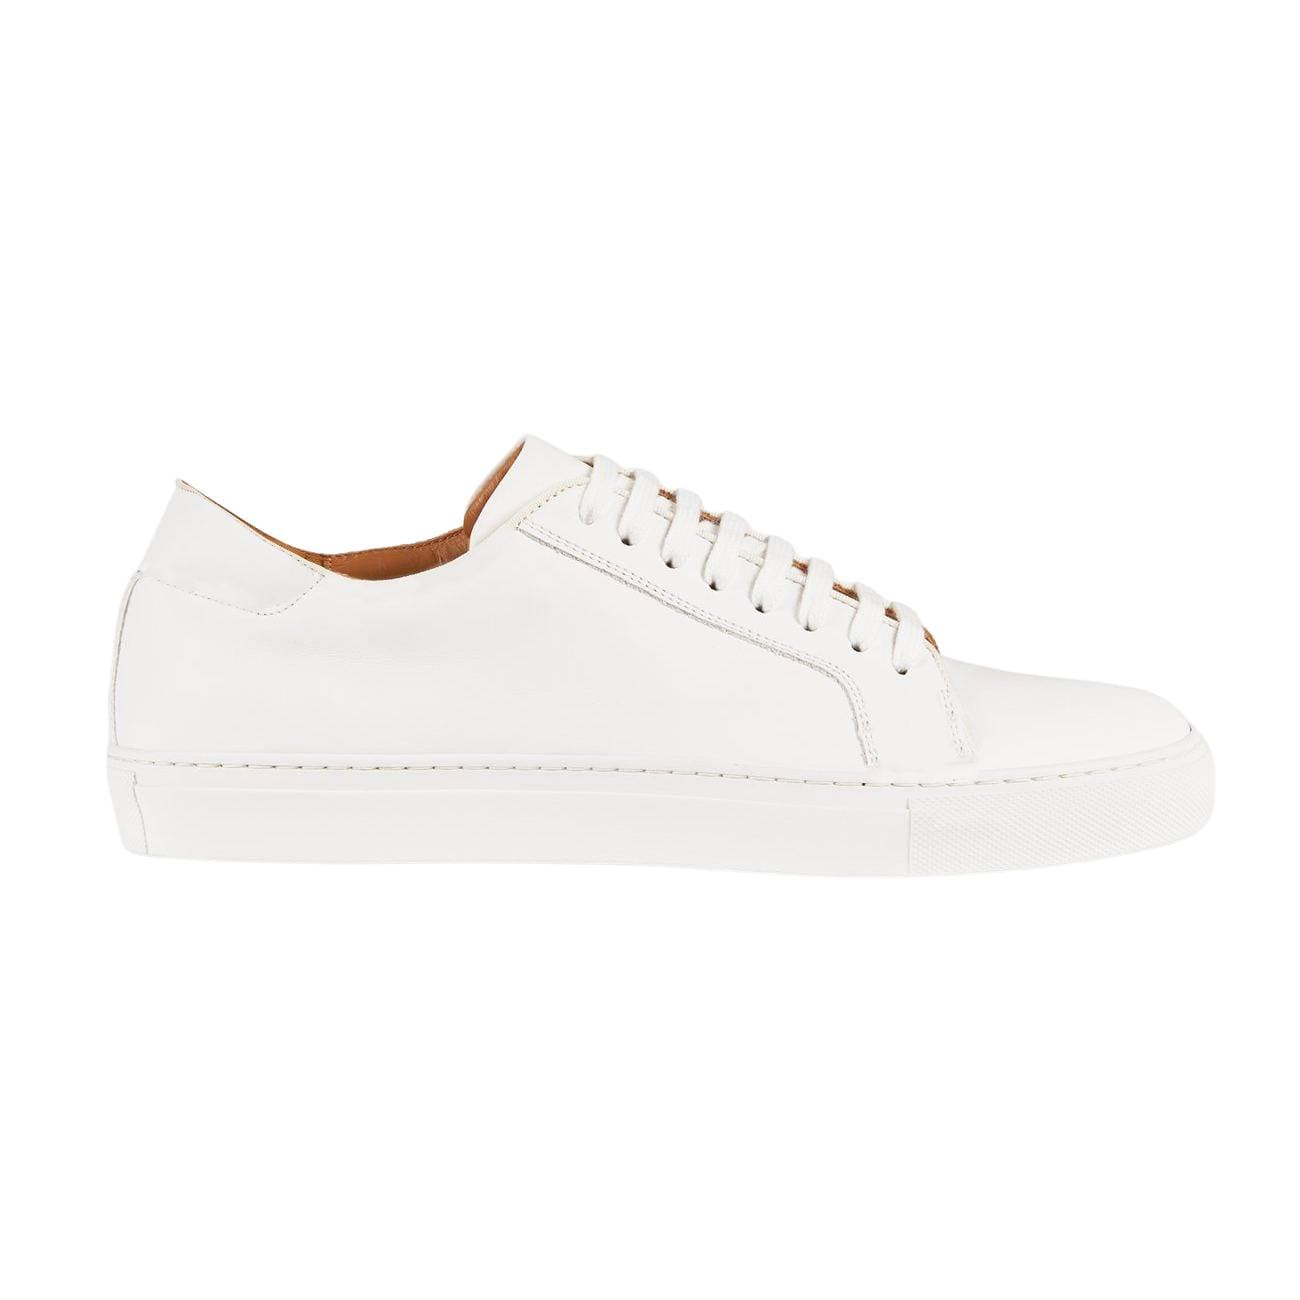 Women's leather sneakers - White